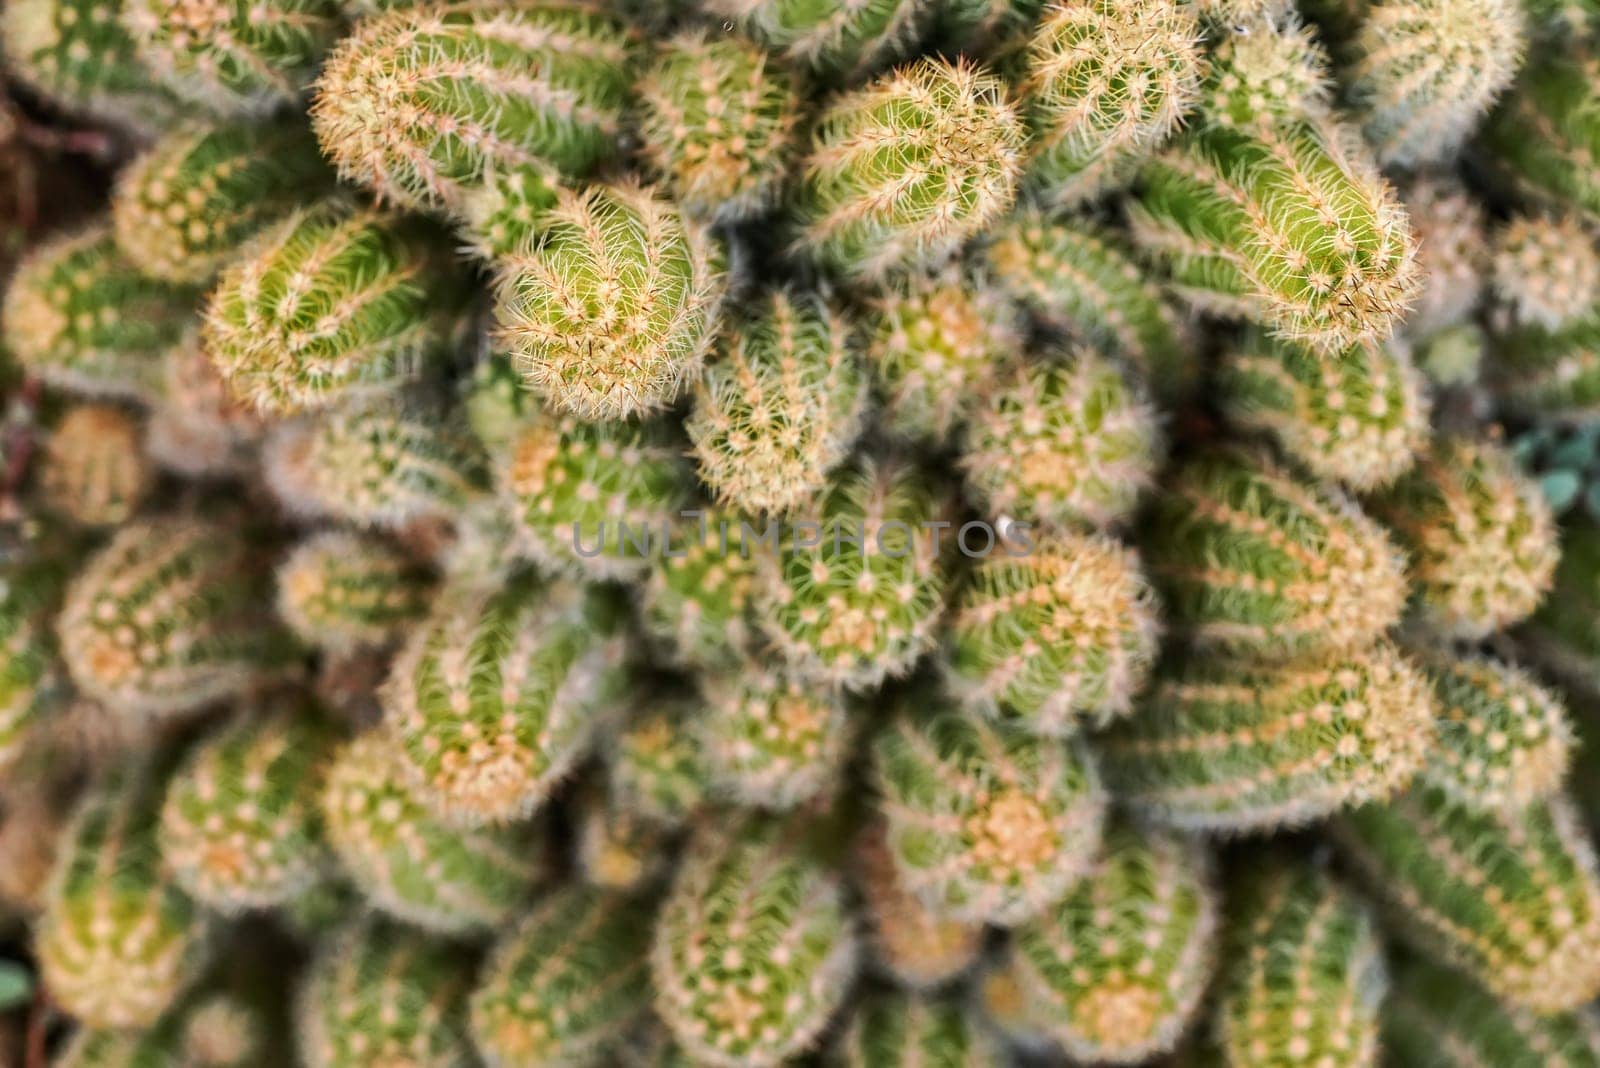 Closeup detail - group of cacti growing together, sharp thorns on green plants, top down view